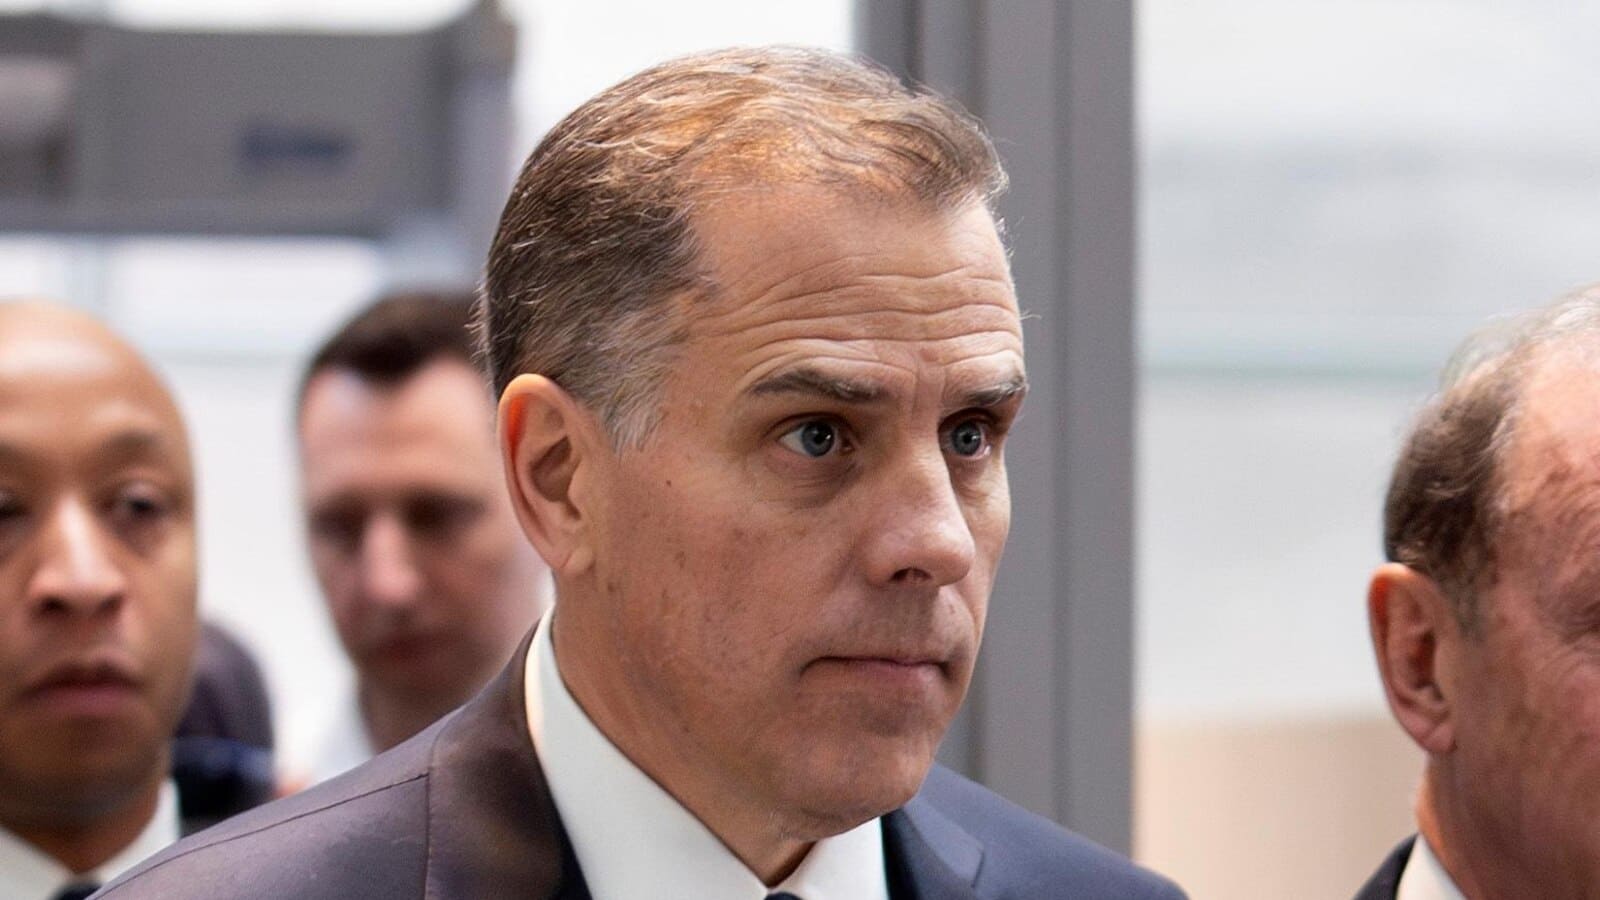 Judge rejects Hunter Biden’s bid to delay his June trial on federal gun charges